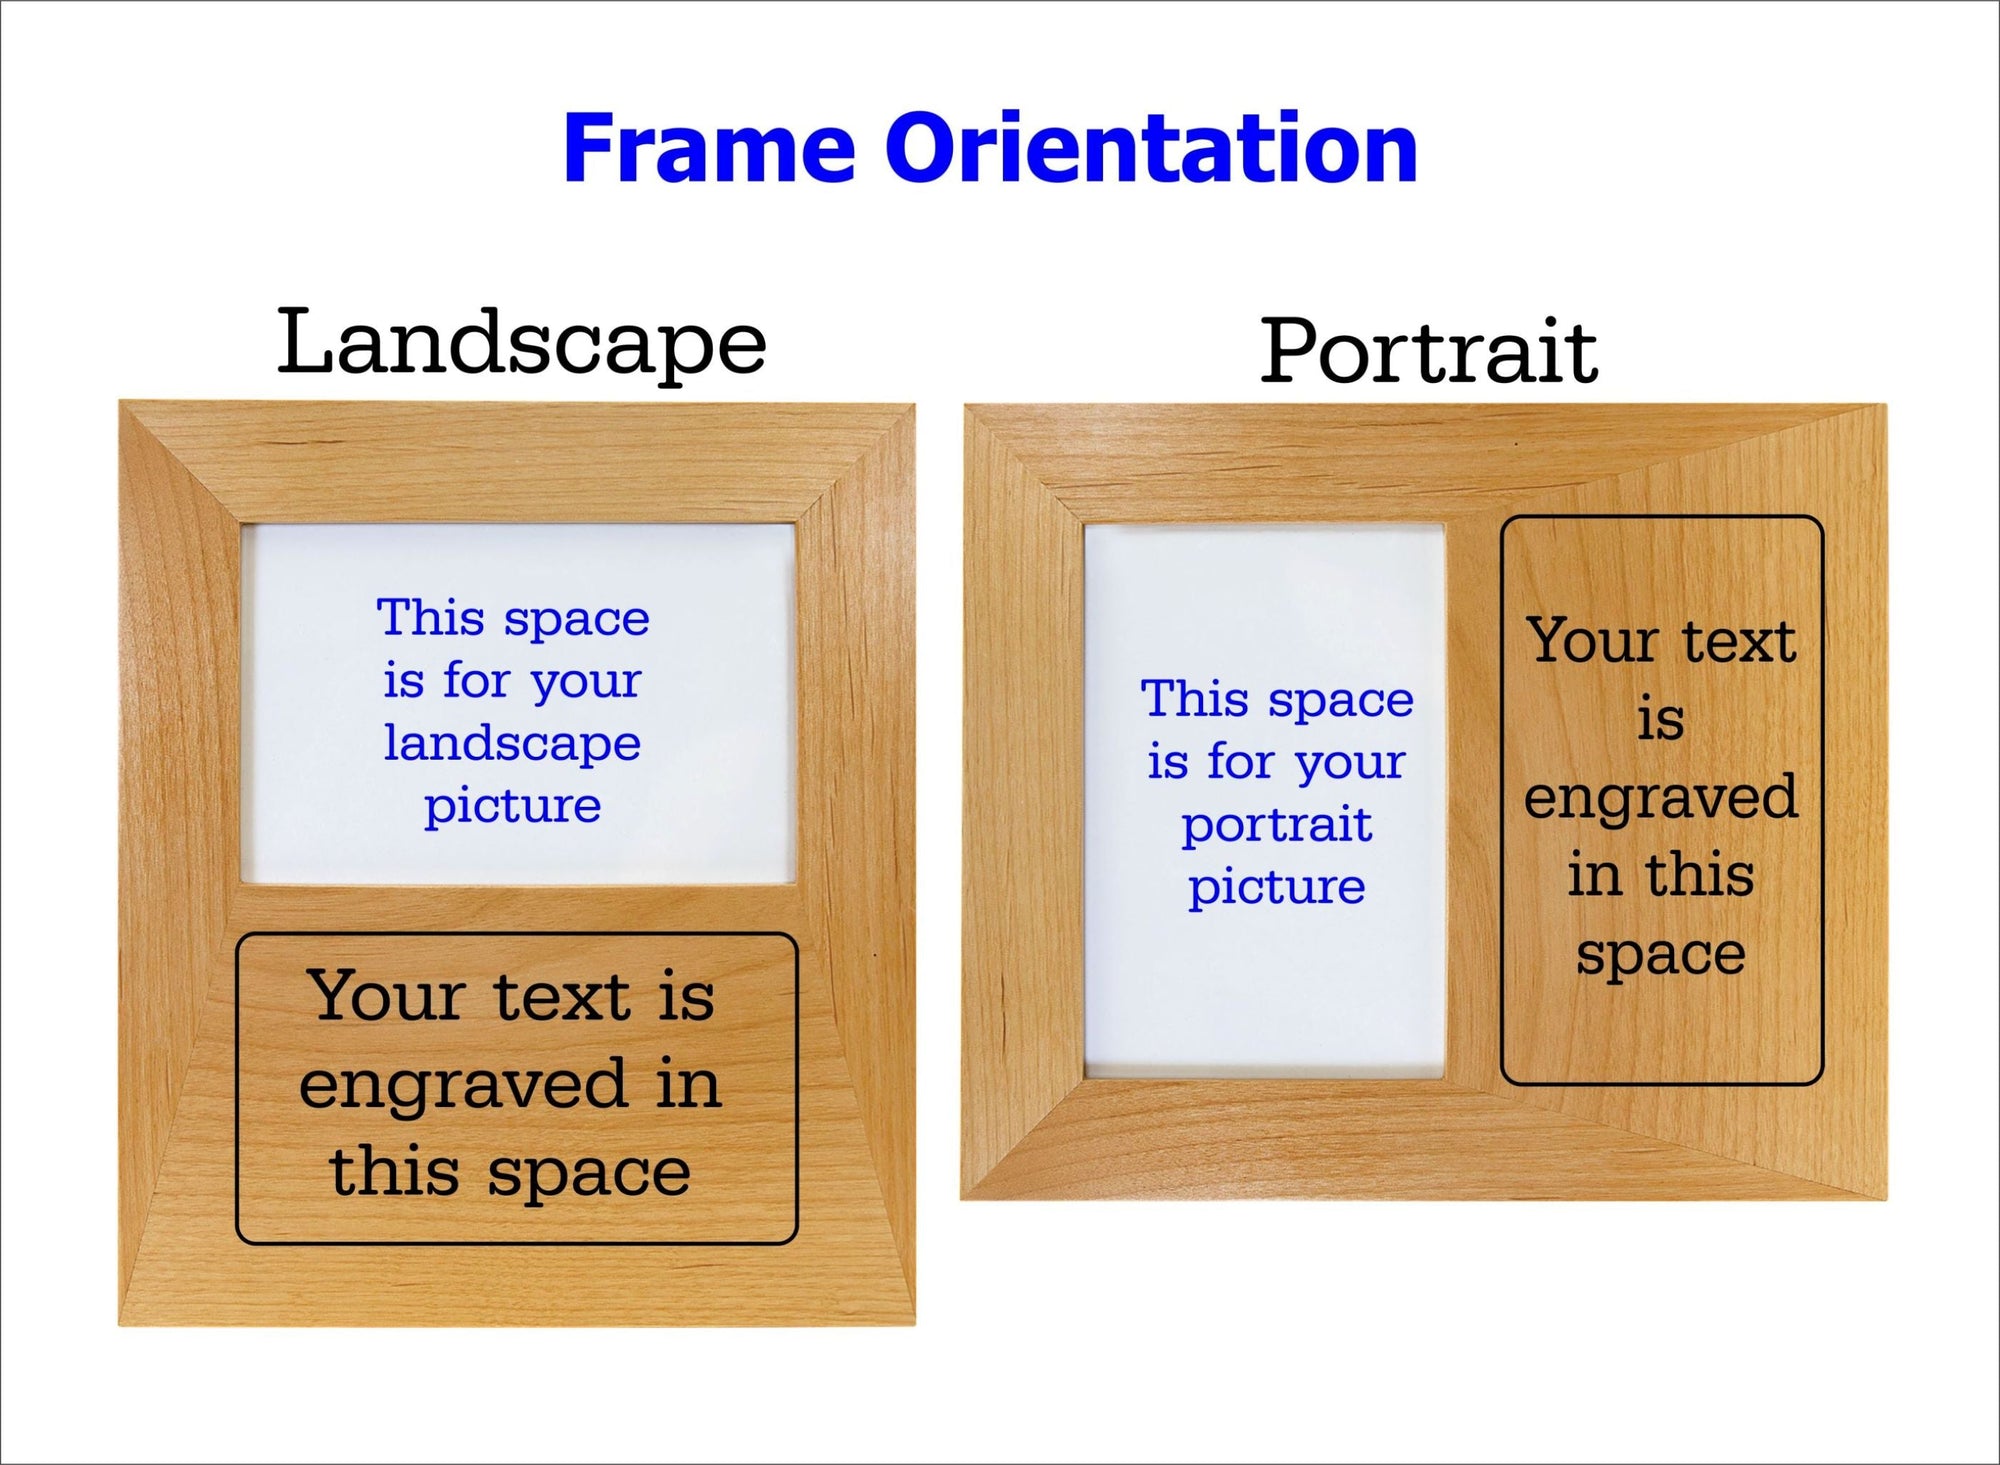 Personalized Picture Frame | Custom Engraved Wood Frames 4x6 5x7